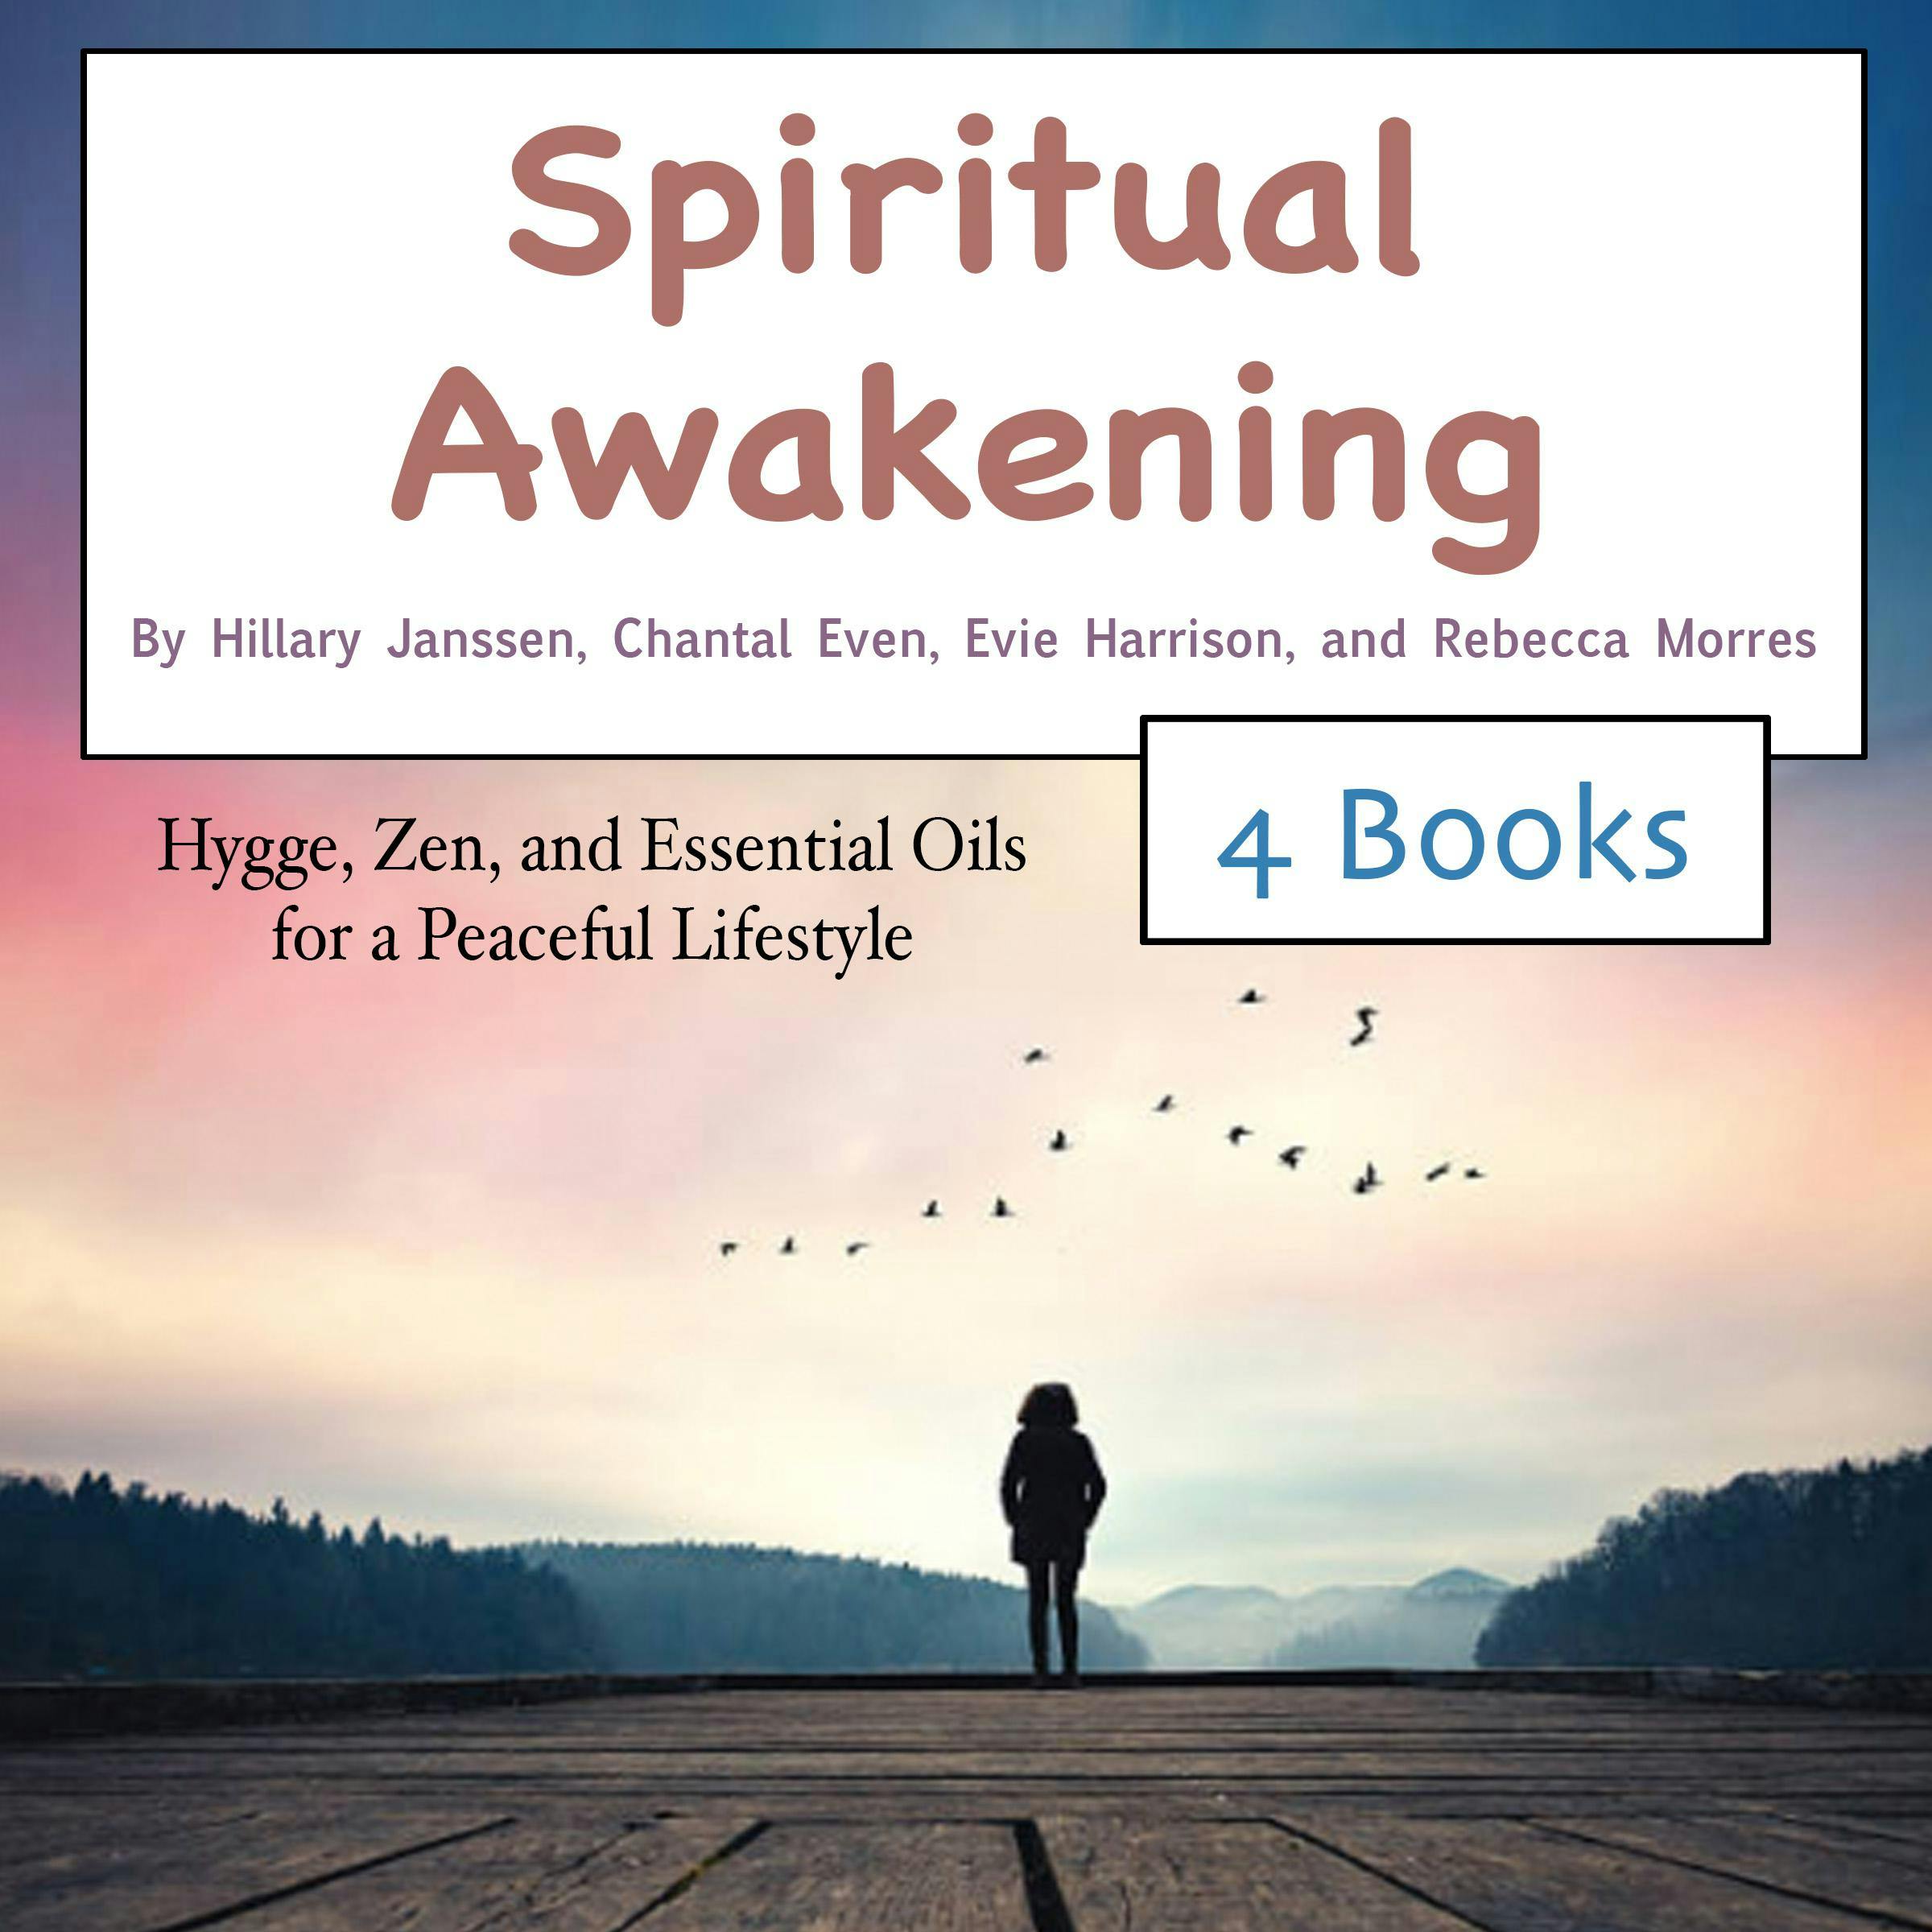 Spiritual Awakening: Hygge, Zen, and Essential Oils for a Peaceful Lifestyle - Rebecca Morres, Hillary Janssen, Chantal Even, Evie Harrison